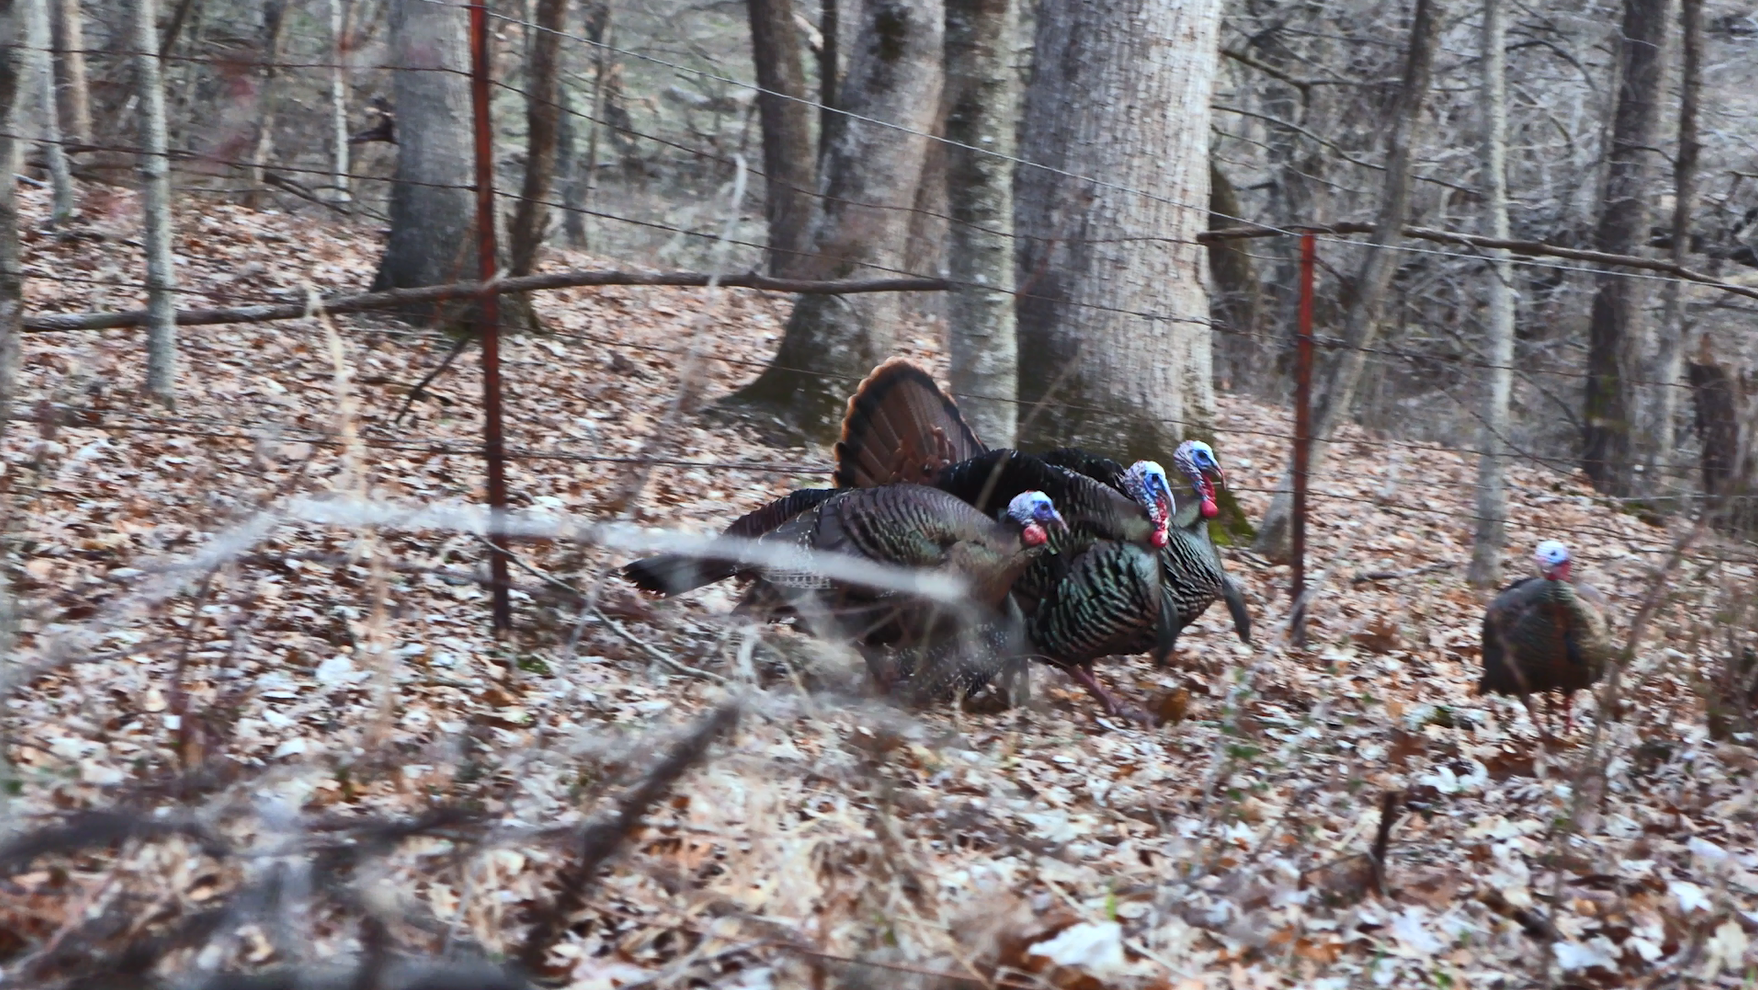 Image relating to How to Set Up and Take Down Turkey Decoys